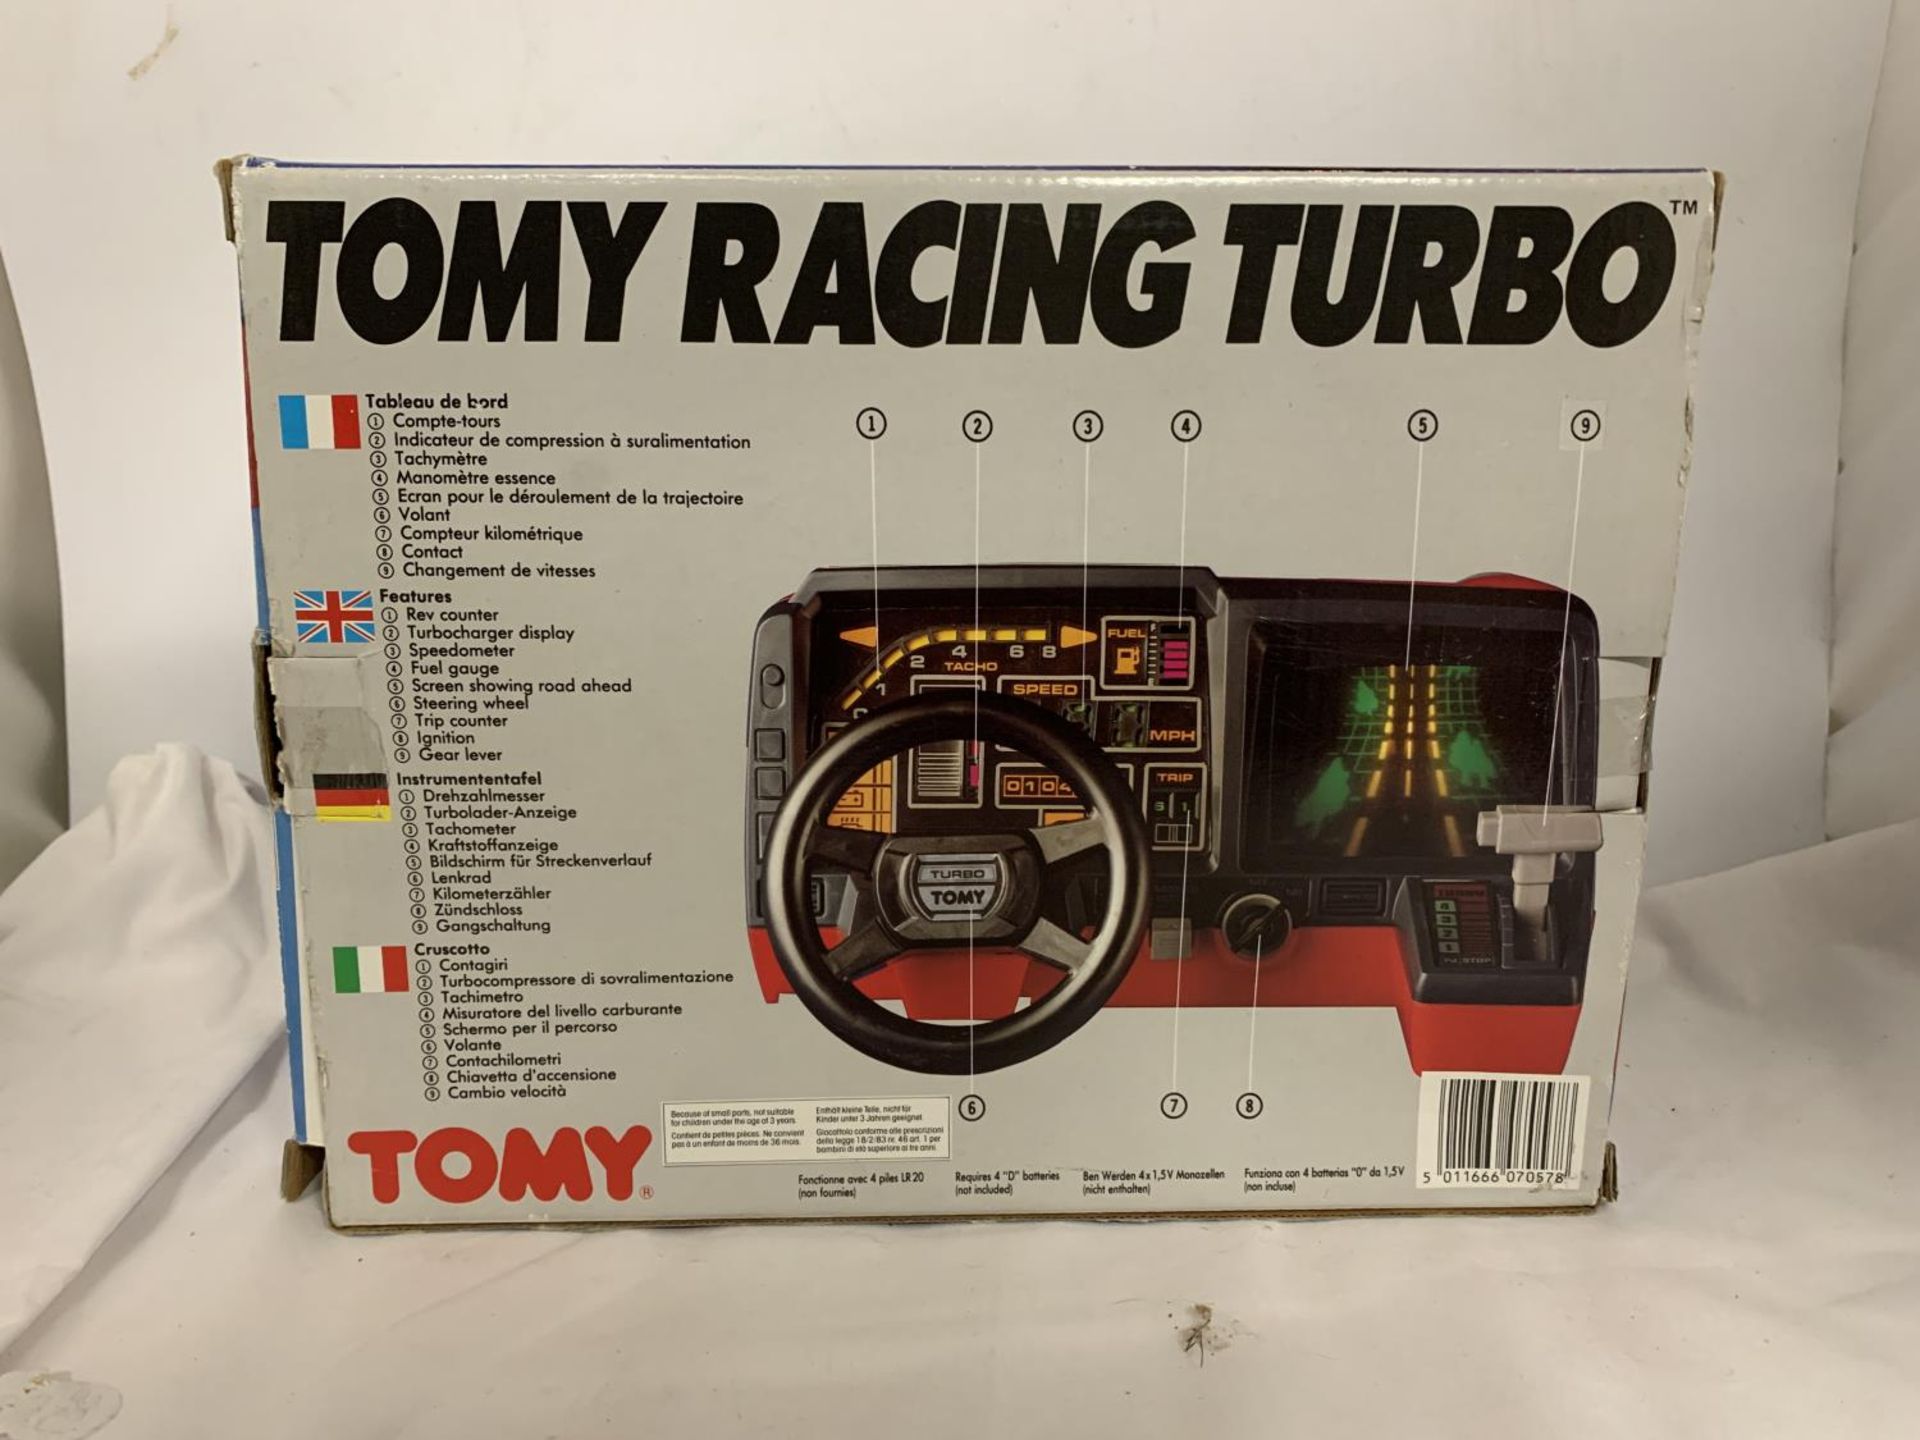 A TONY RACING TURBO DRIVING GAME - Image 4 of 4